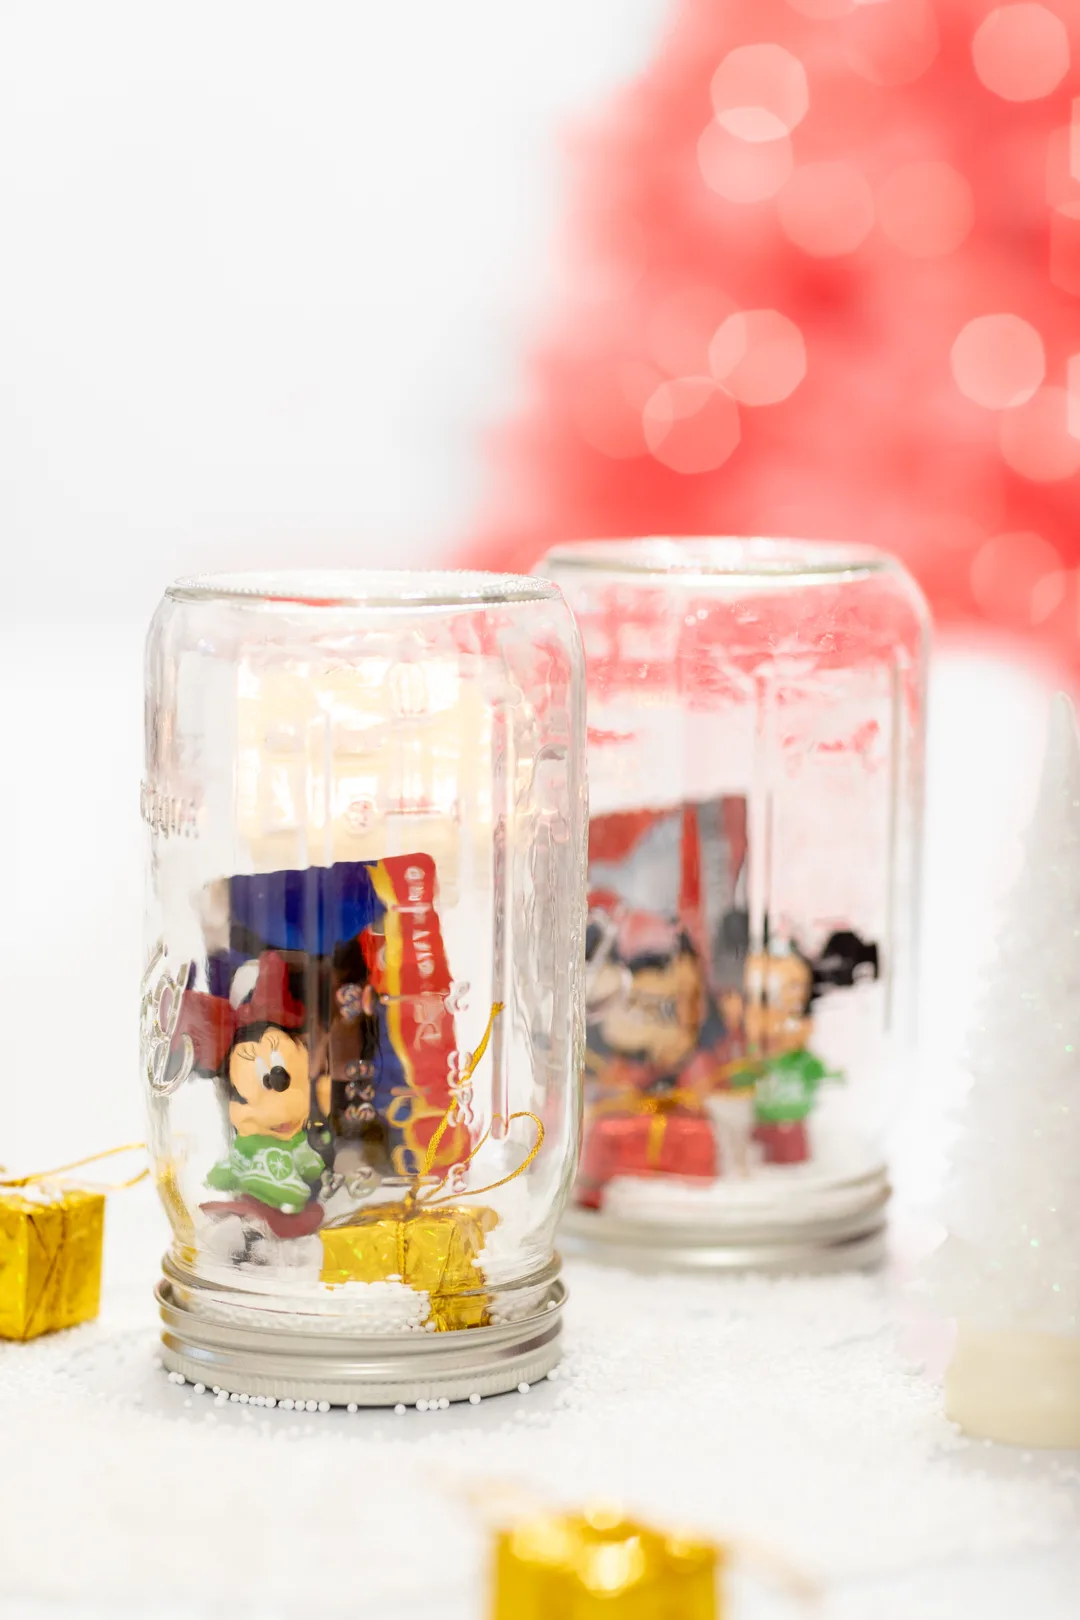 Mickey mouse ornament in a mason jar gift